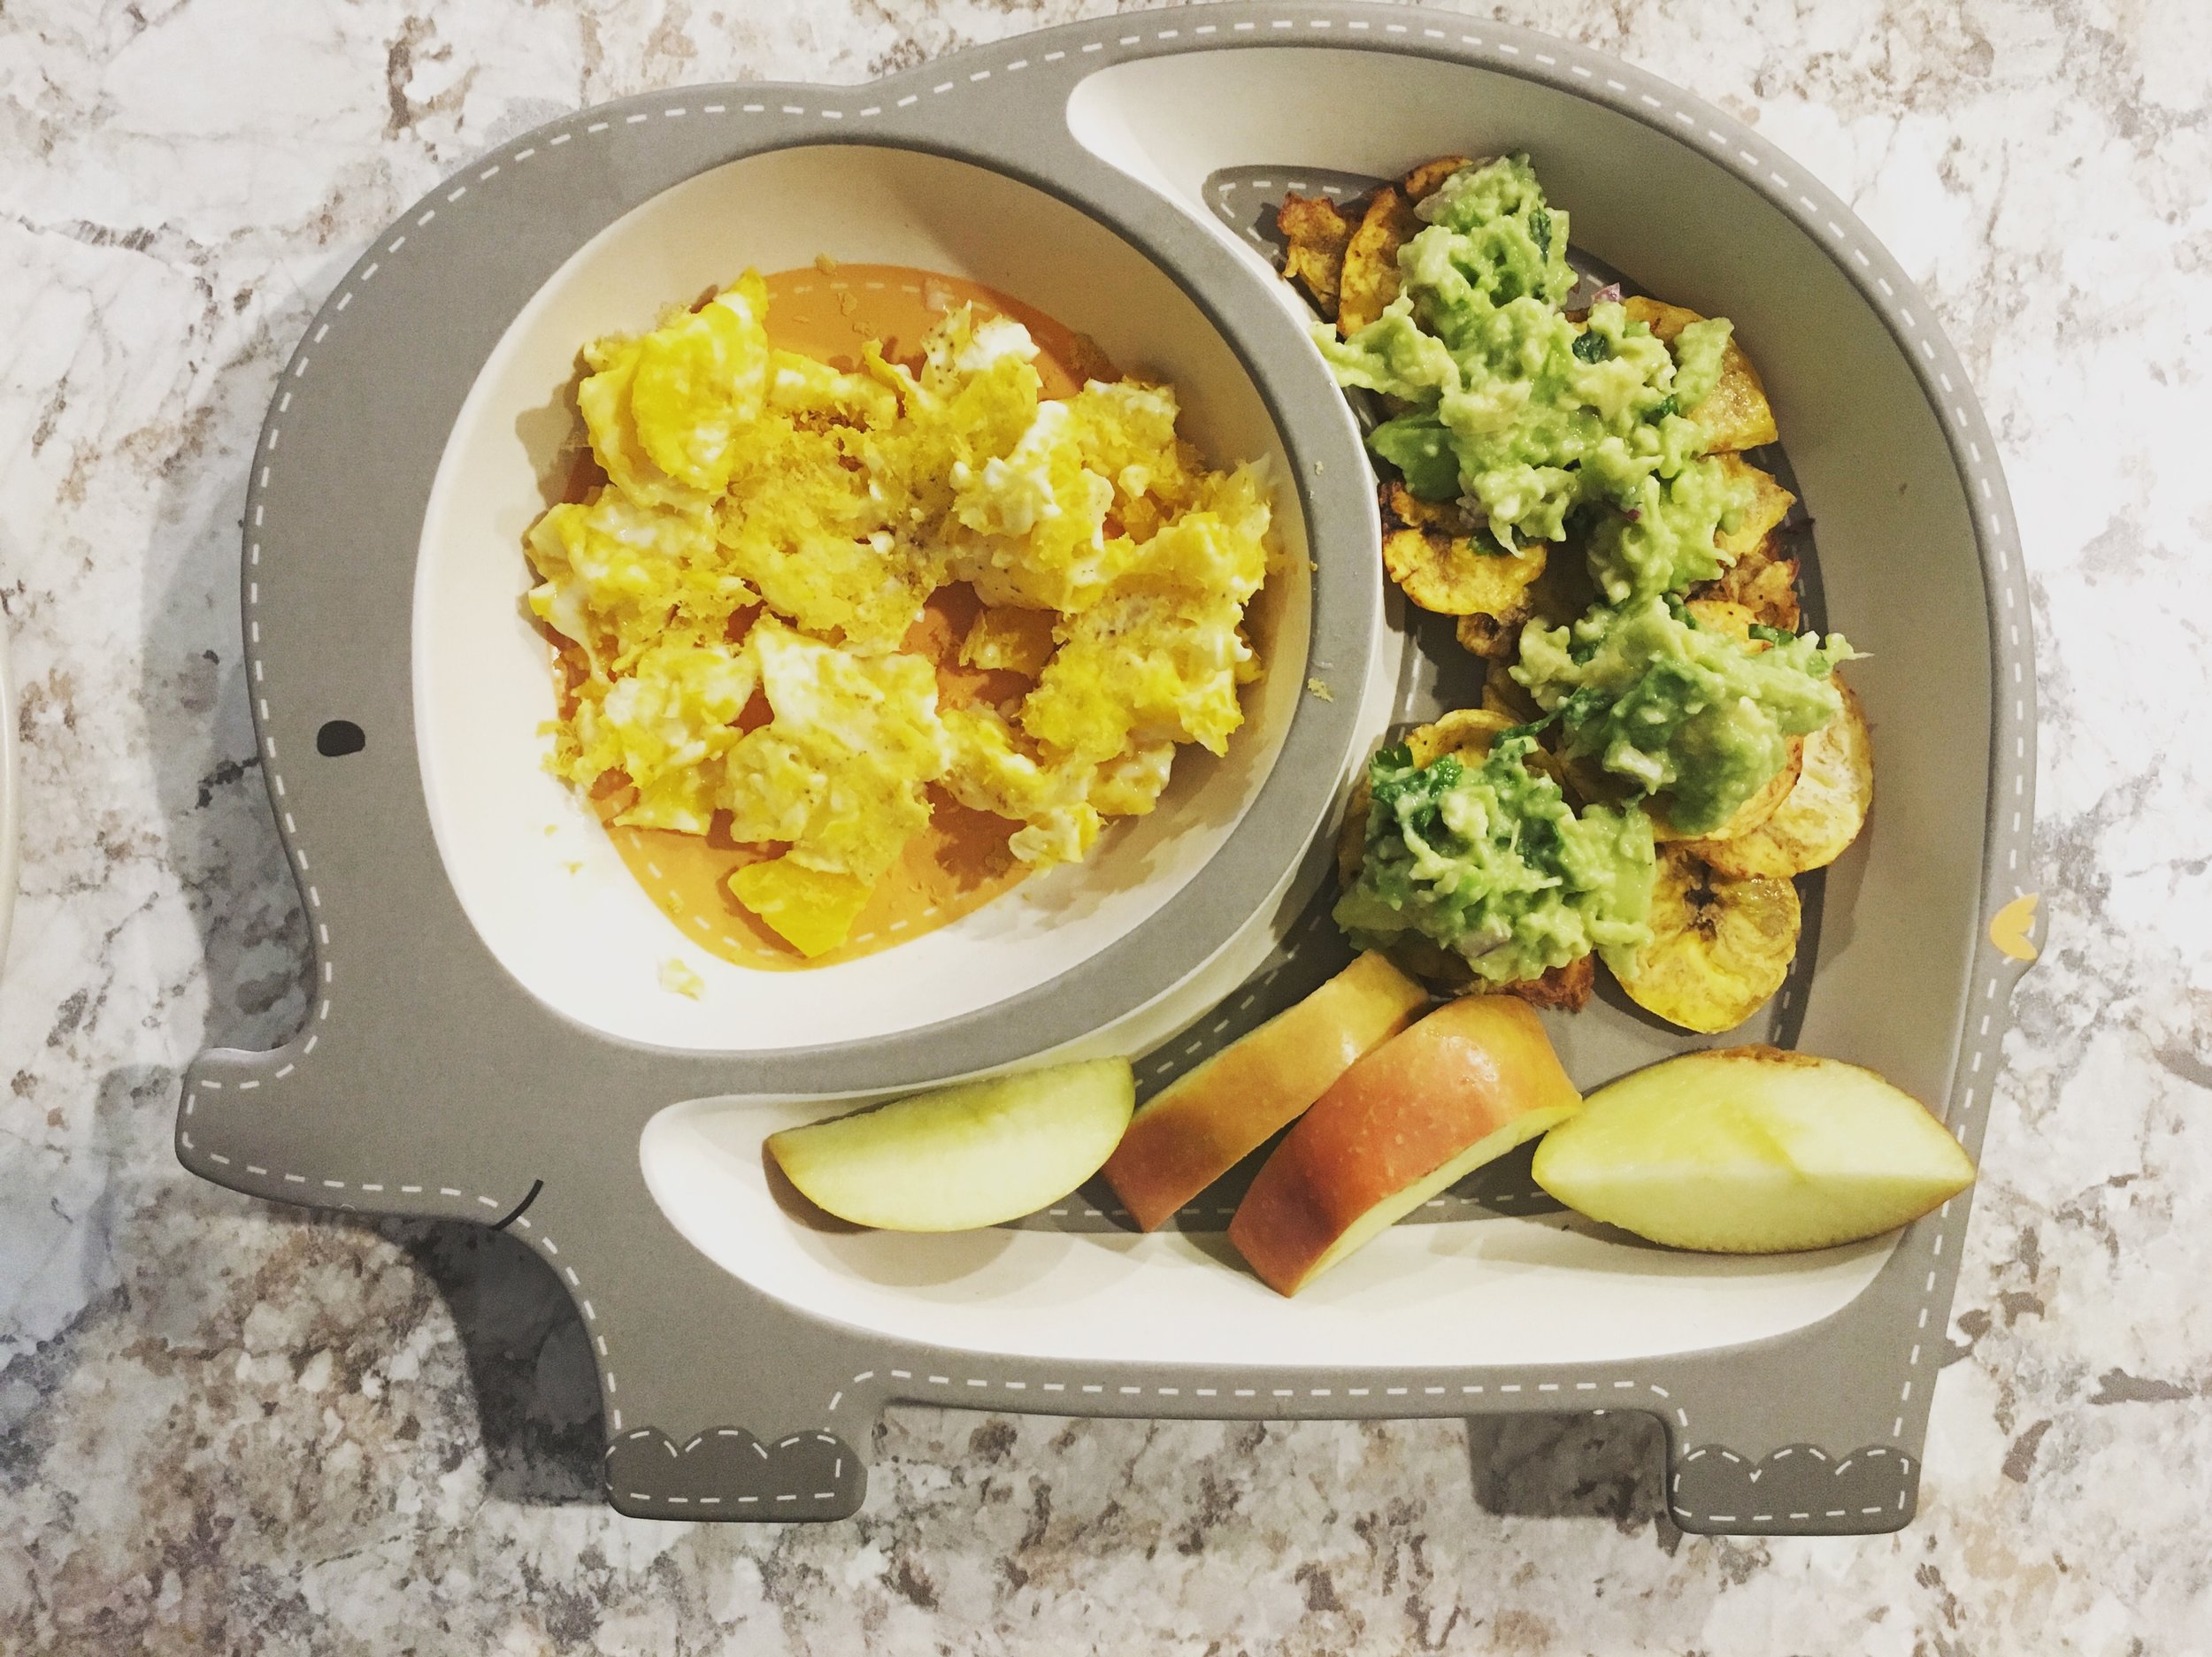 Eggs, plantain chips w/ guac, apple slices